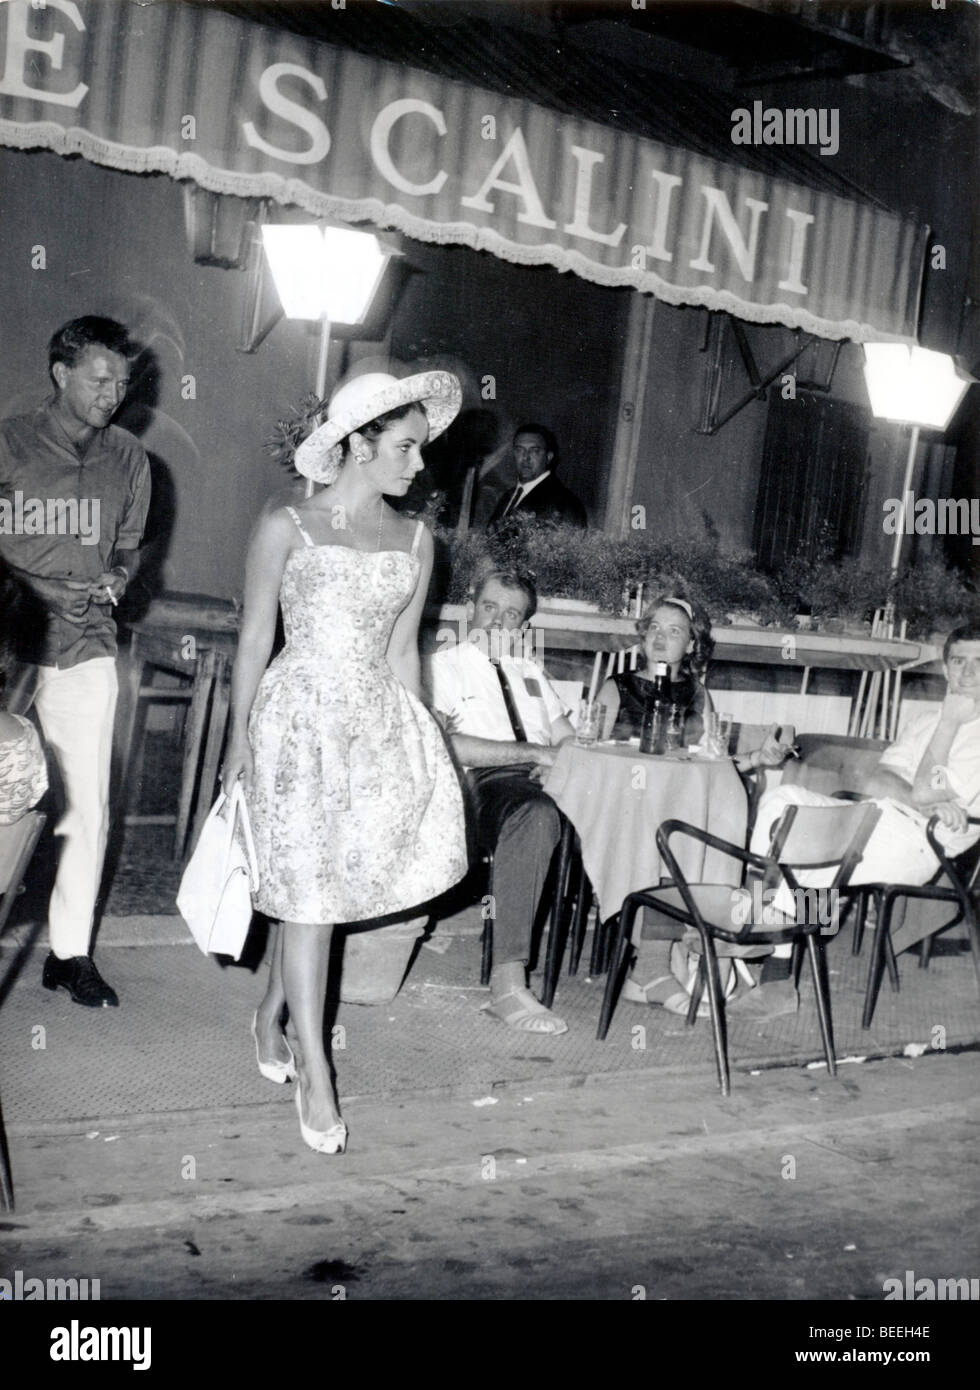 Actress Elizabeth Taylor leaving a restaurant in Rome Stock Photo